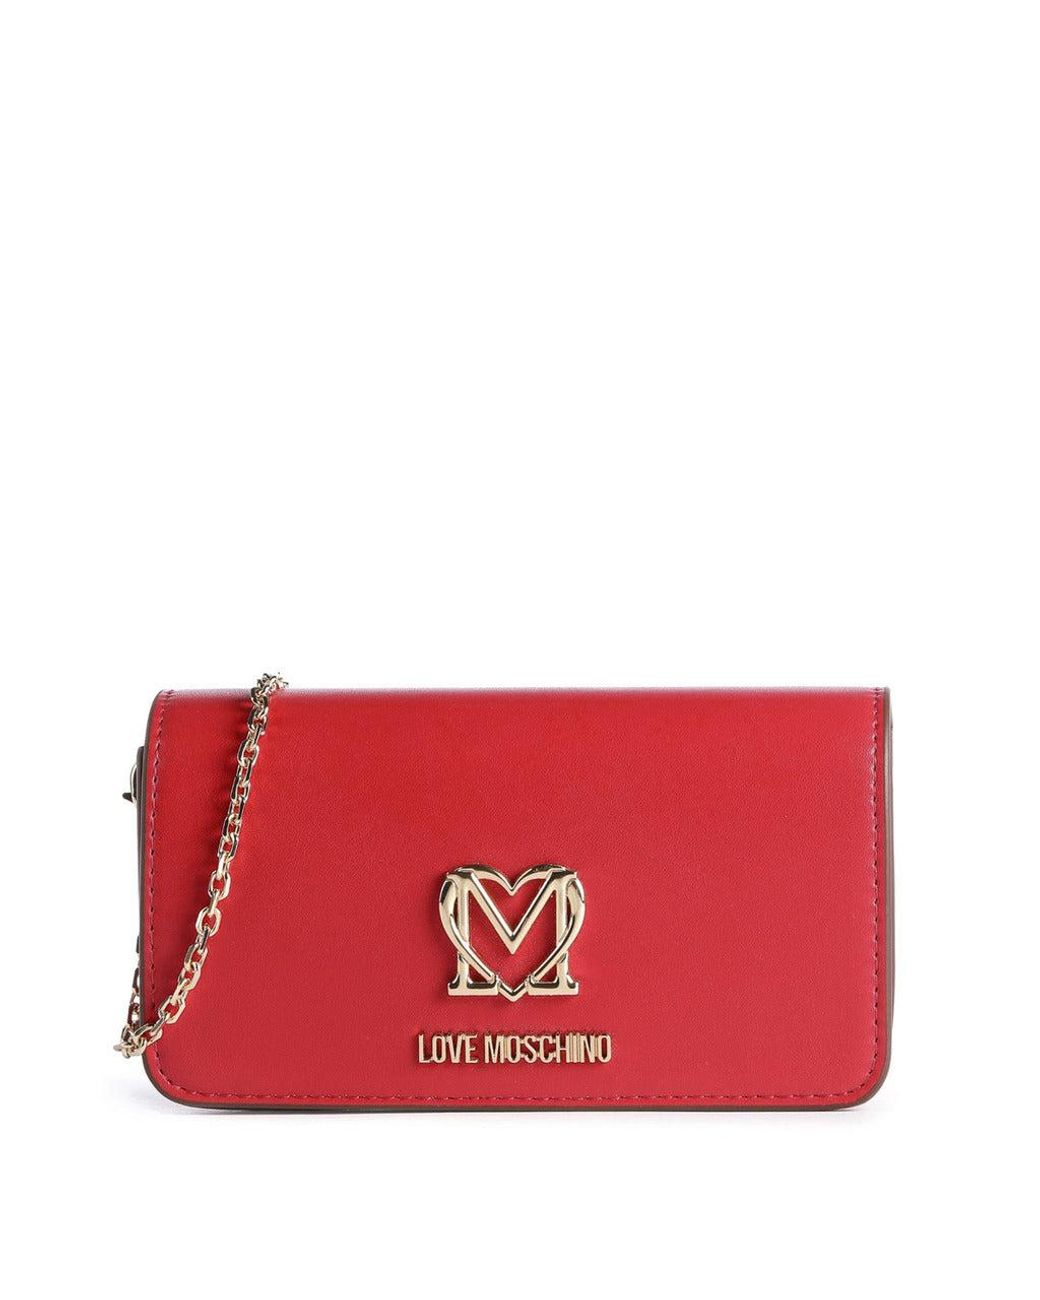 Love Moschino Shoulder Bag in Red | Lyst